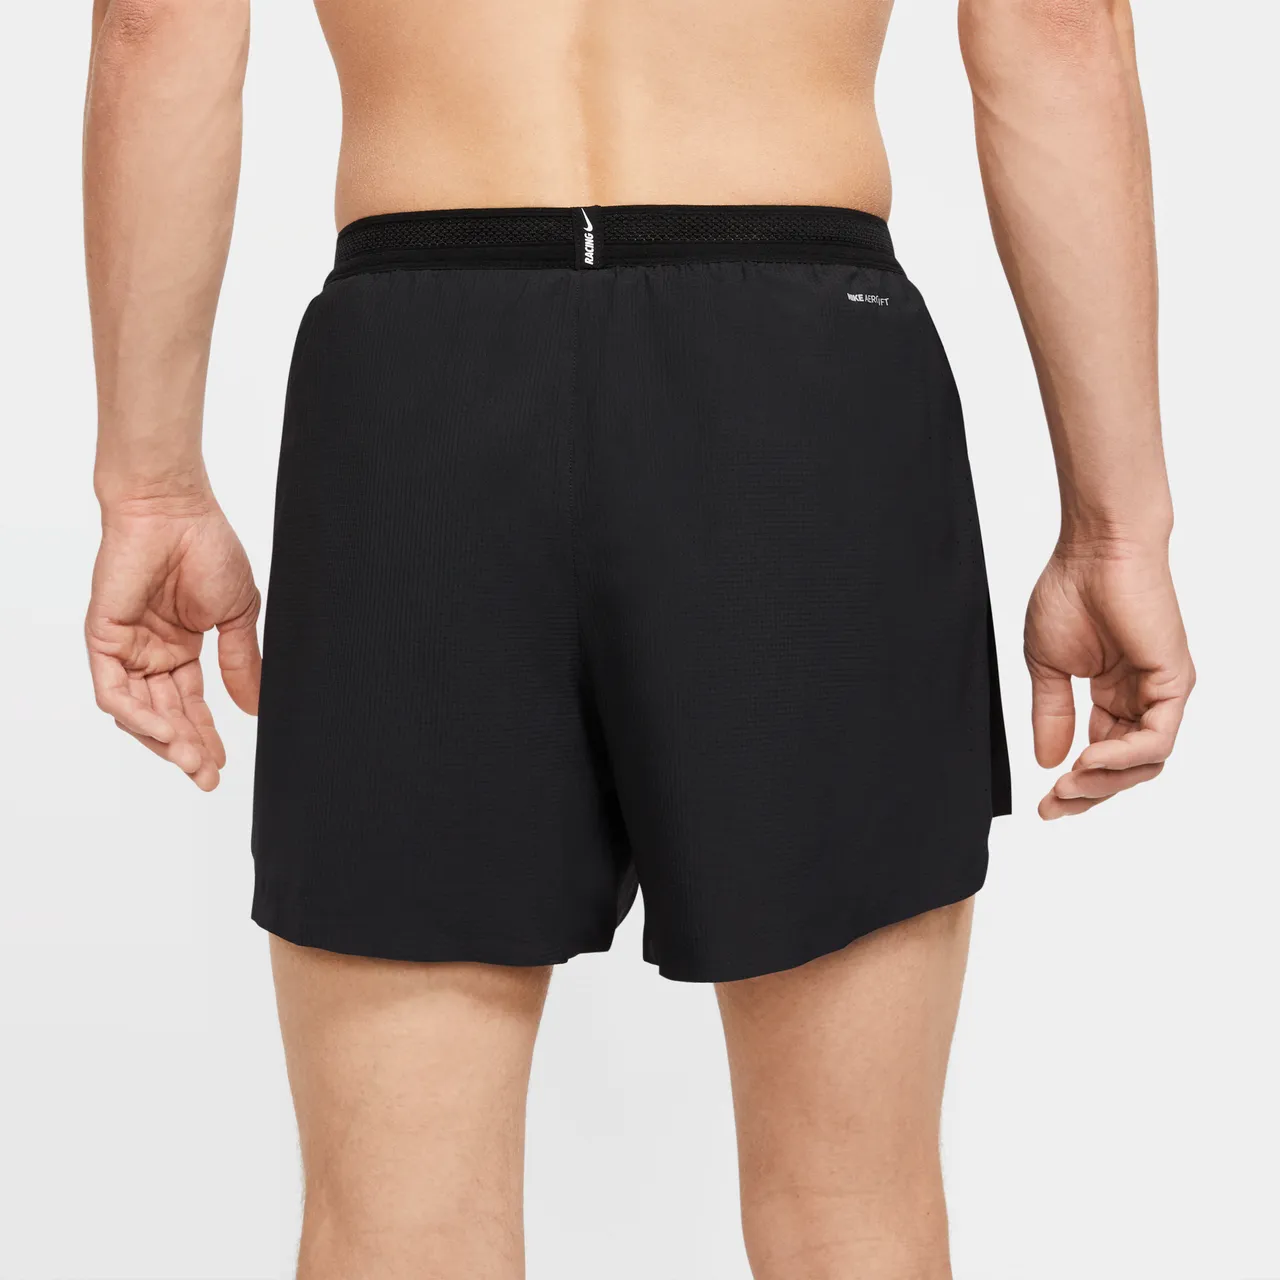 Nike Dri-FIT ADV AeroSwift Men's 10cm (approx.) Brief-Lined Racing Shorts - Black - Polyester